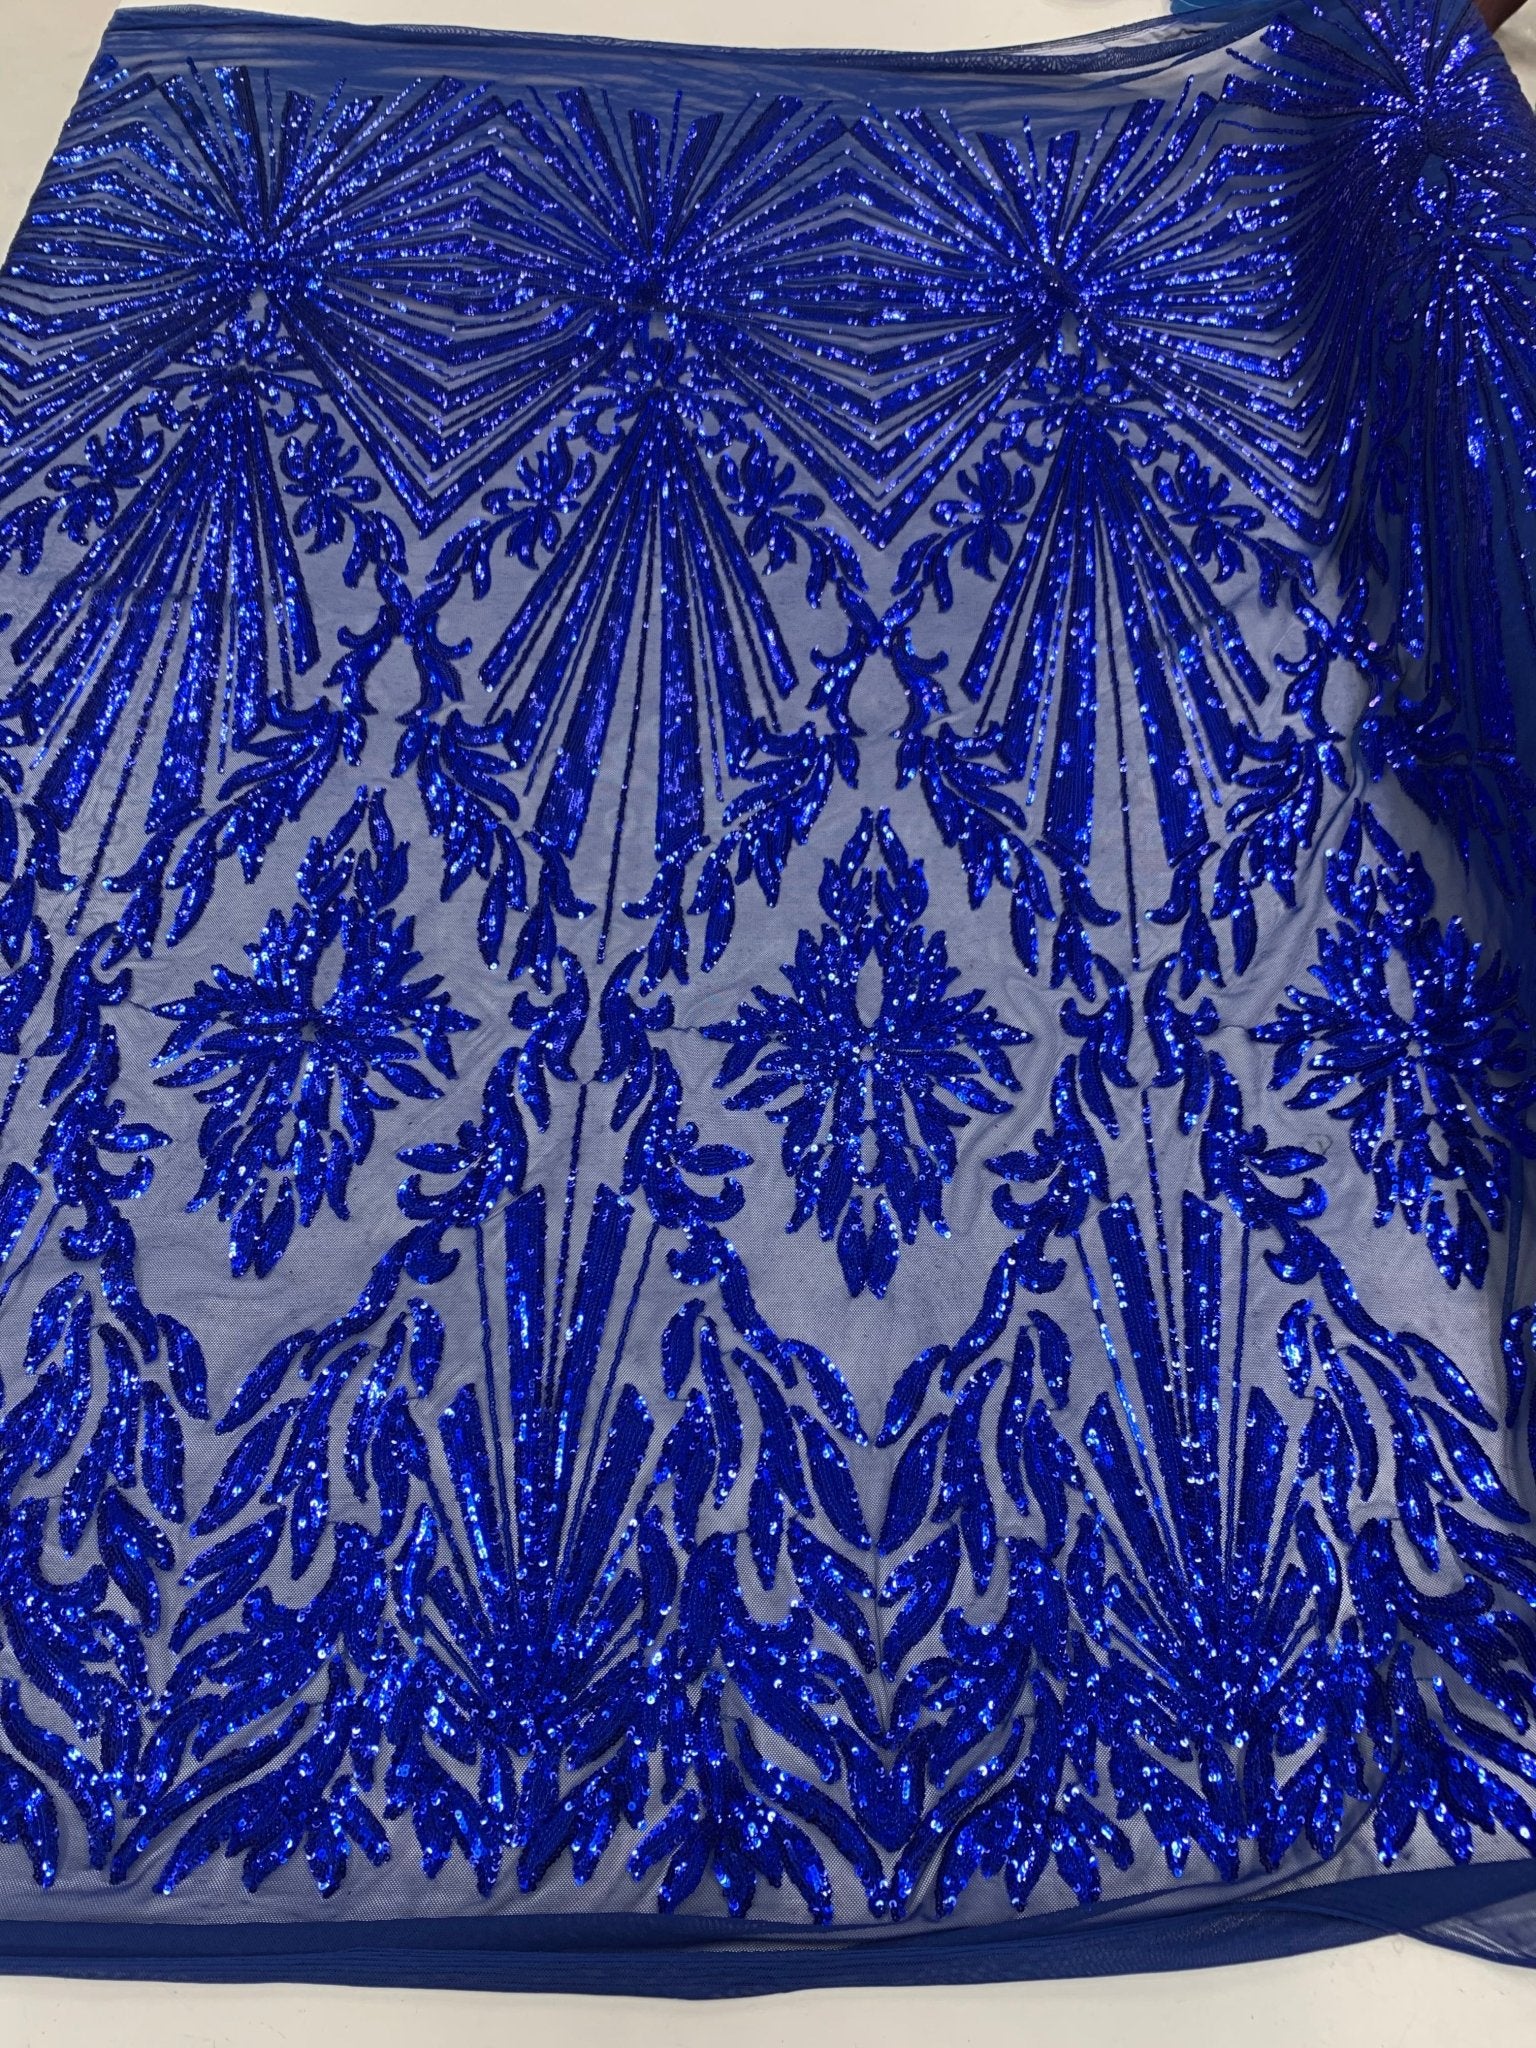 French Embroidery Stretch Sequins Fabric By The Yard on a Mesh LaceICEFABRICICE FABRICSRoyal BlueFrench Embroidery Stretch Sequins Fabric By The Yard on a Mesh Lace ICEFABRIC Royal Blue